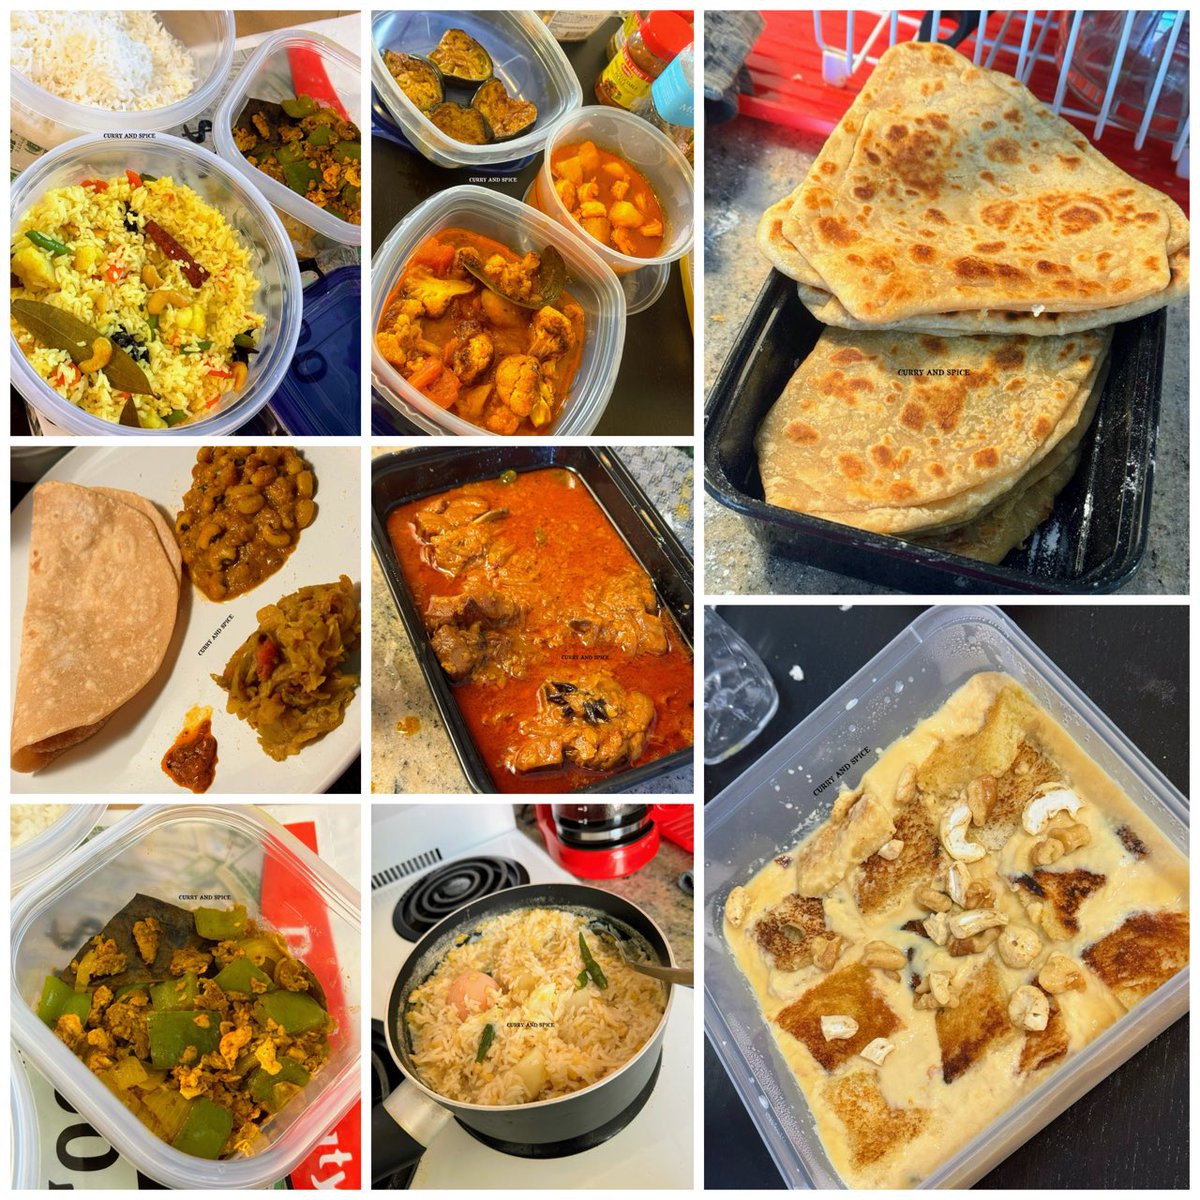 My today’s cooking includes lamb, eggs, prawn, Bengali fried rice, stuffed & plain flatbreads, plain rice, vegetables. We do love the humblest of the rice & roti plates. #twitterfood